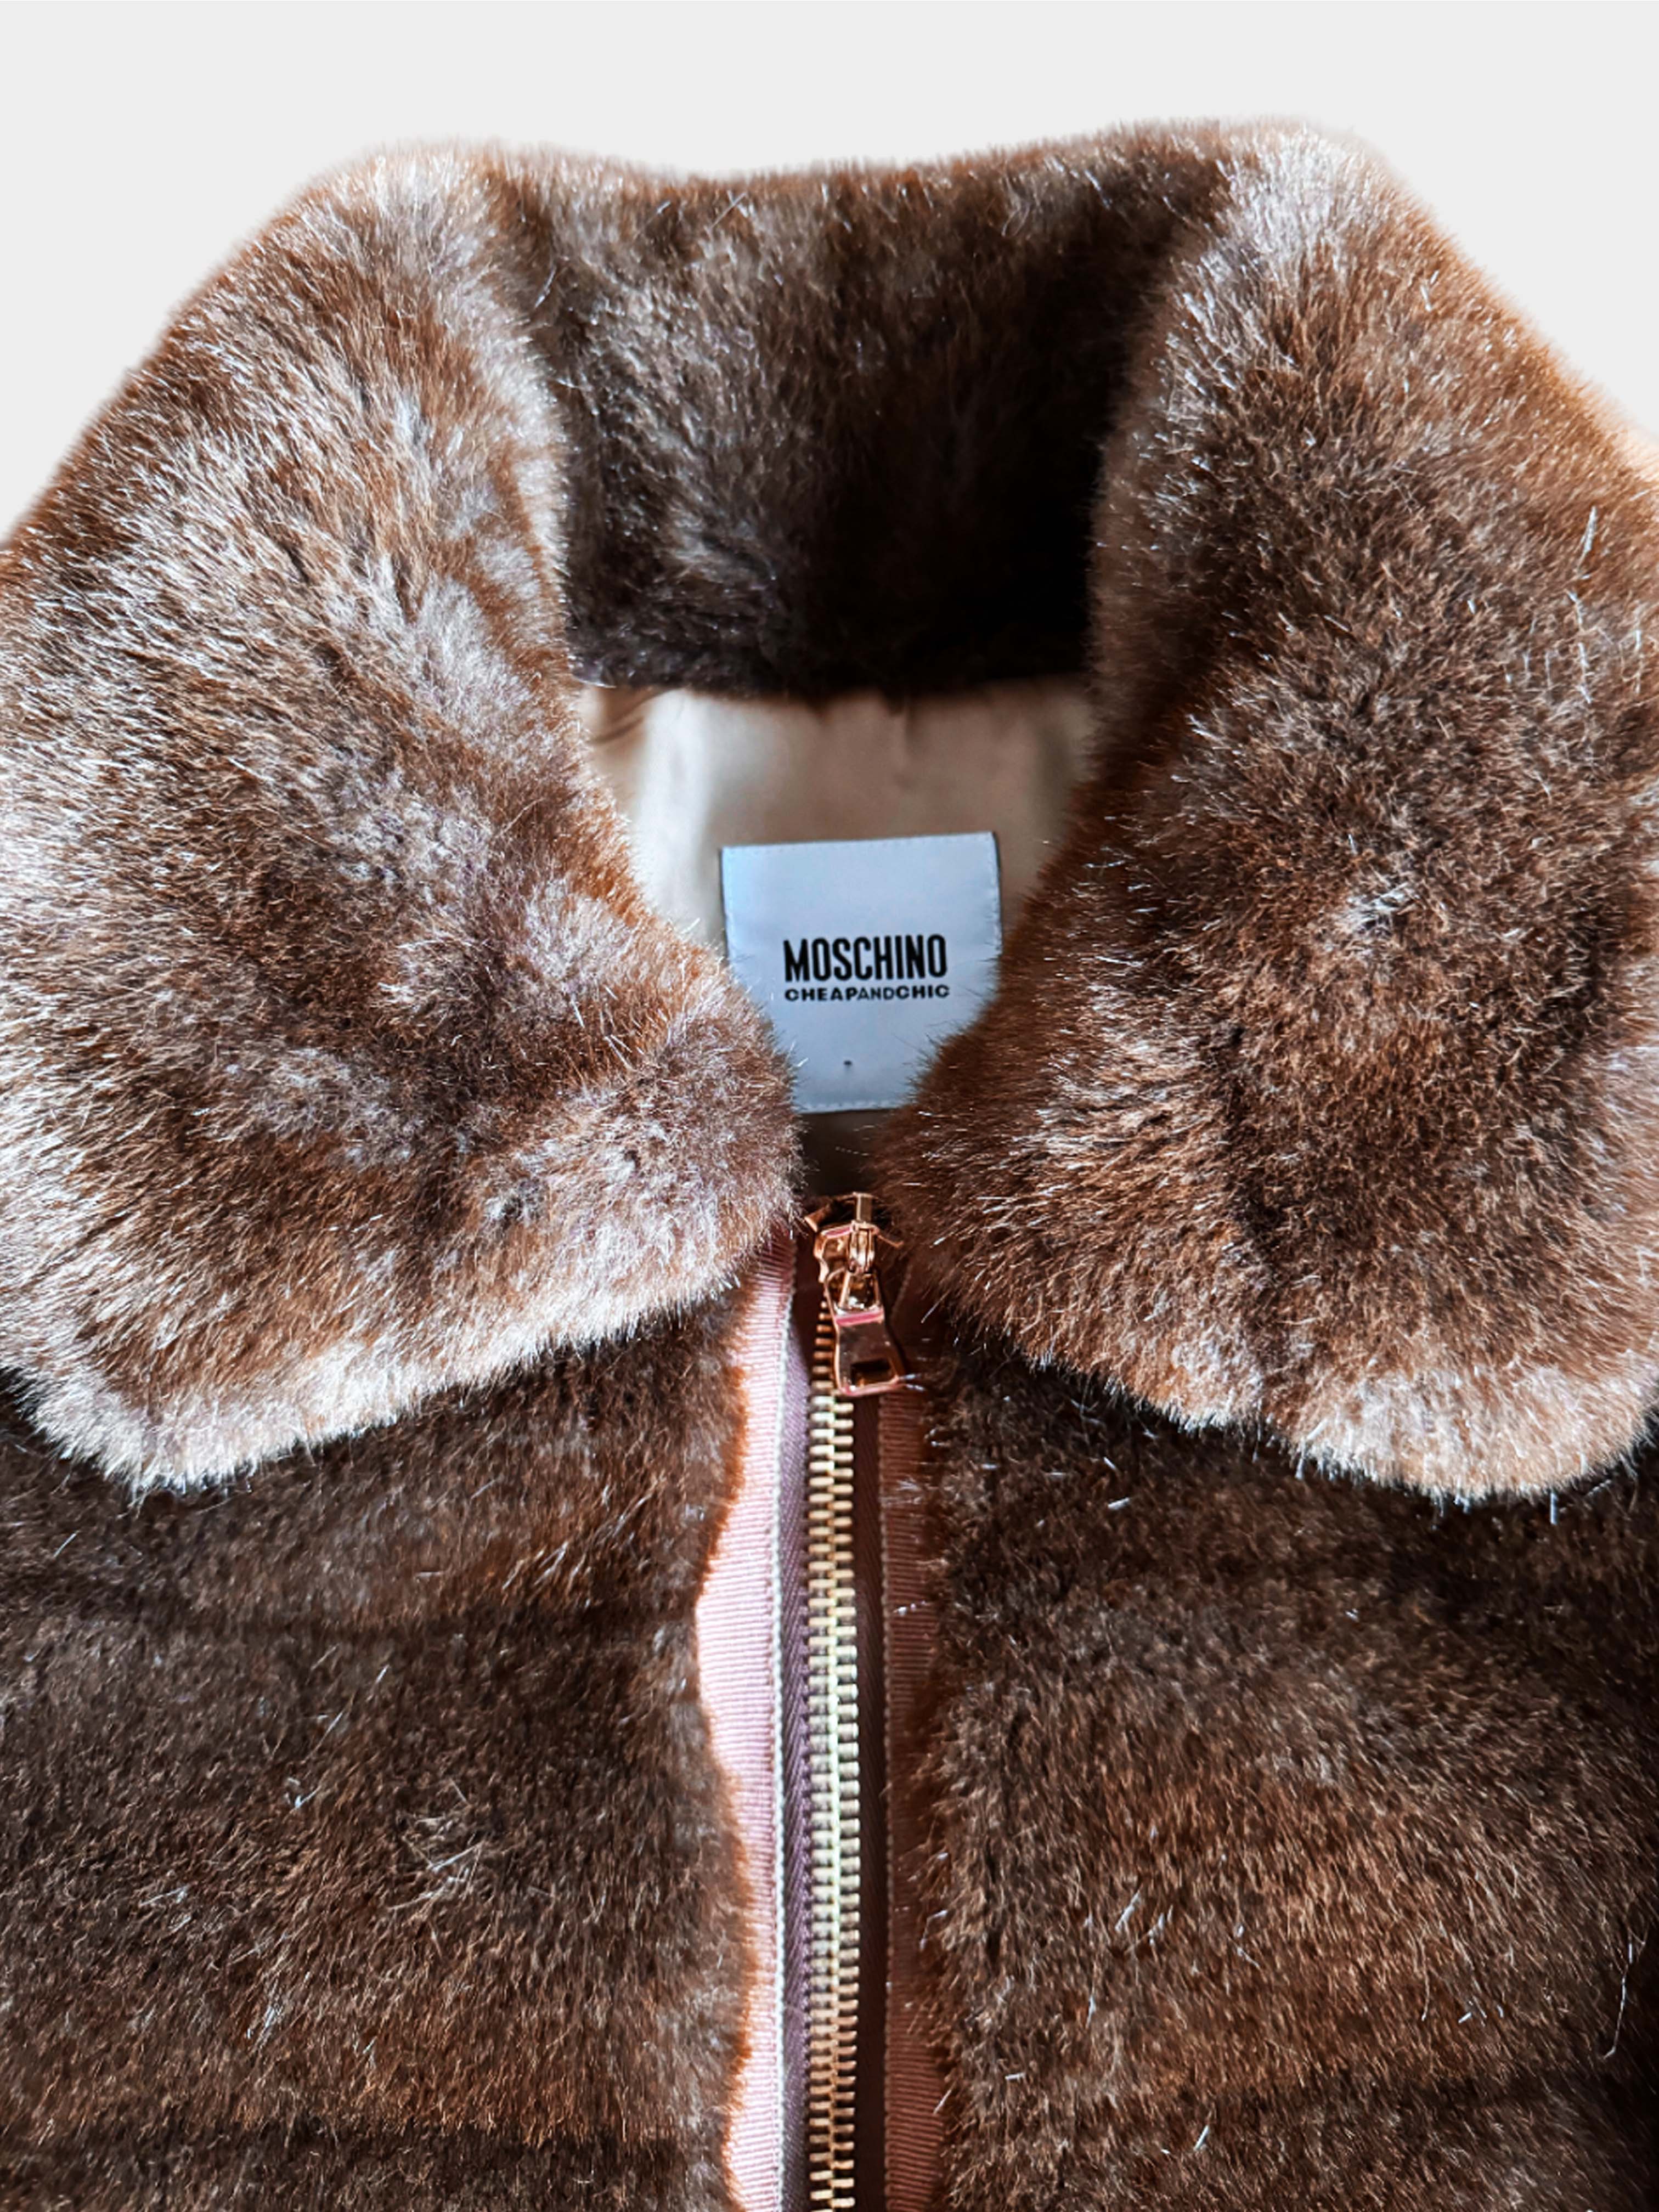 Moschino Cheap and Chic 2000s Brown Faux Fur Cropped Jacket